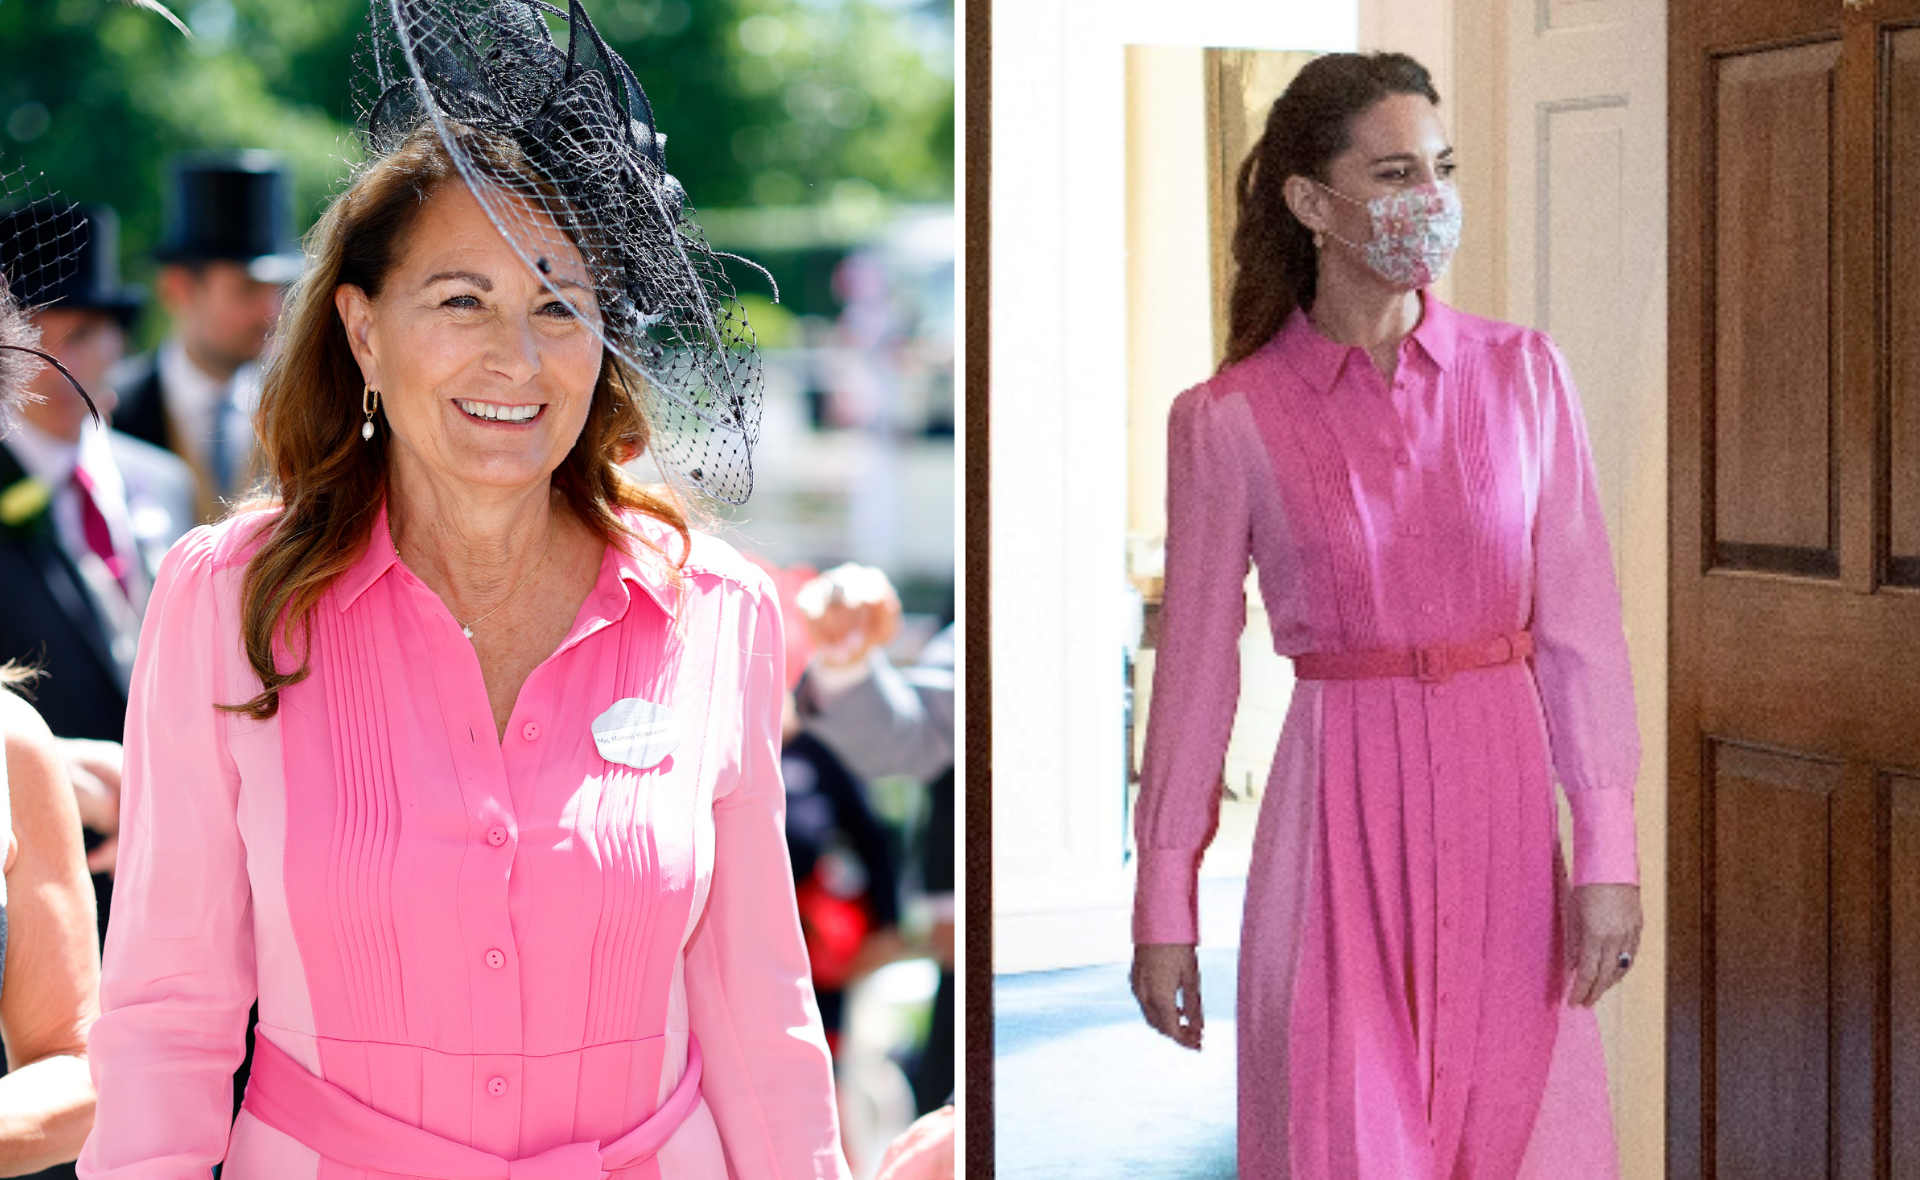 Seeing double: The royals have worn the same outfit on more occasions than you’d think